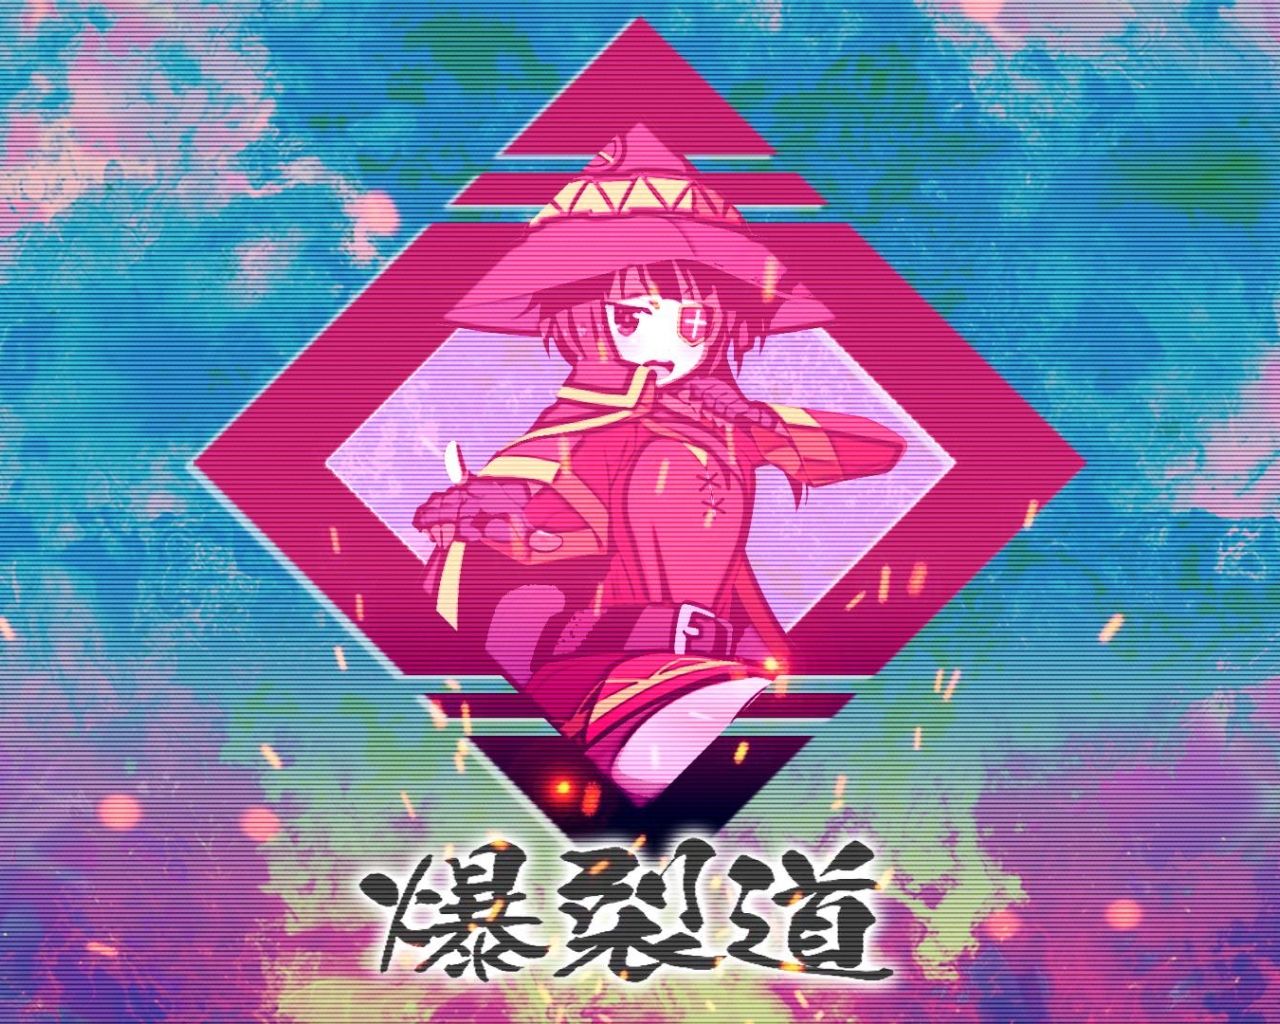 Free download Aesthetic Vaporwave Wallpaper High Quality